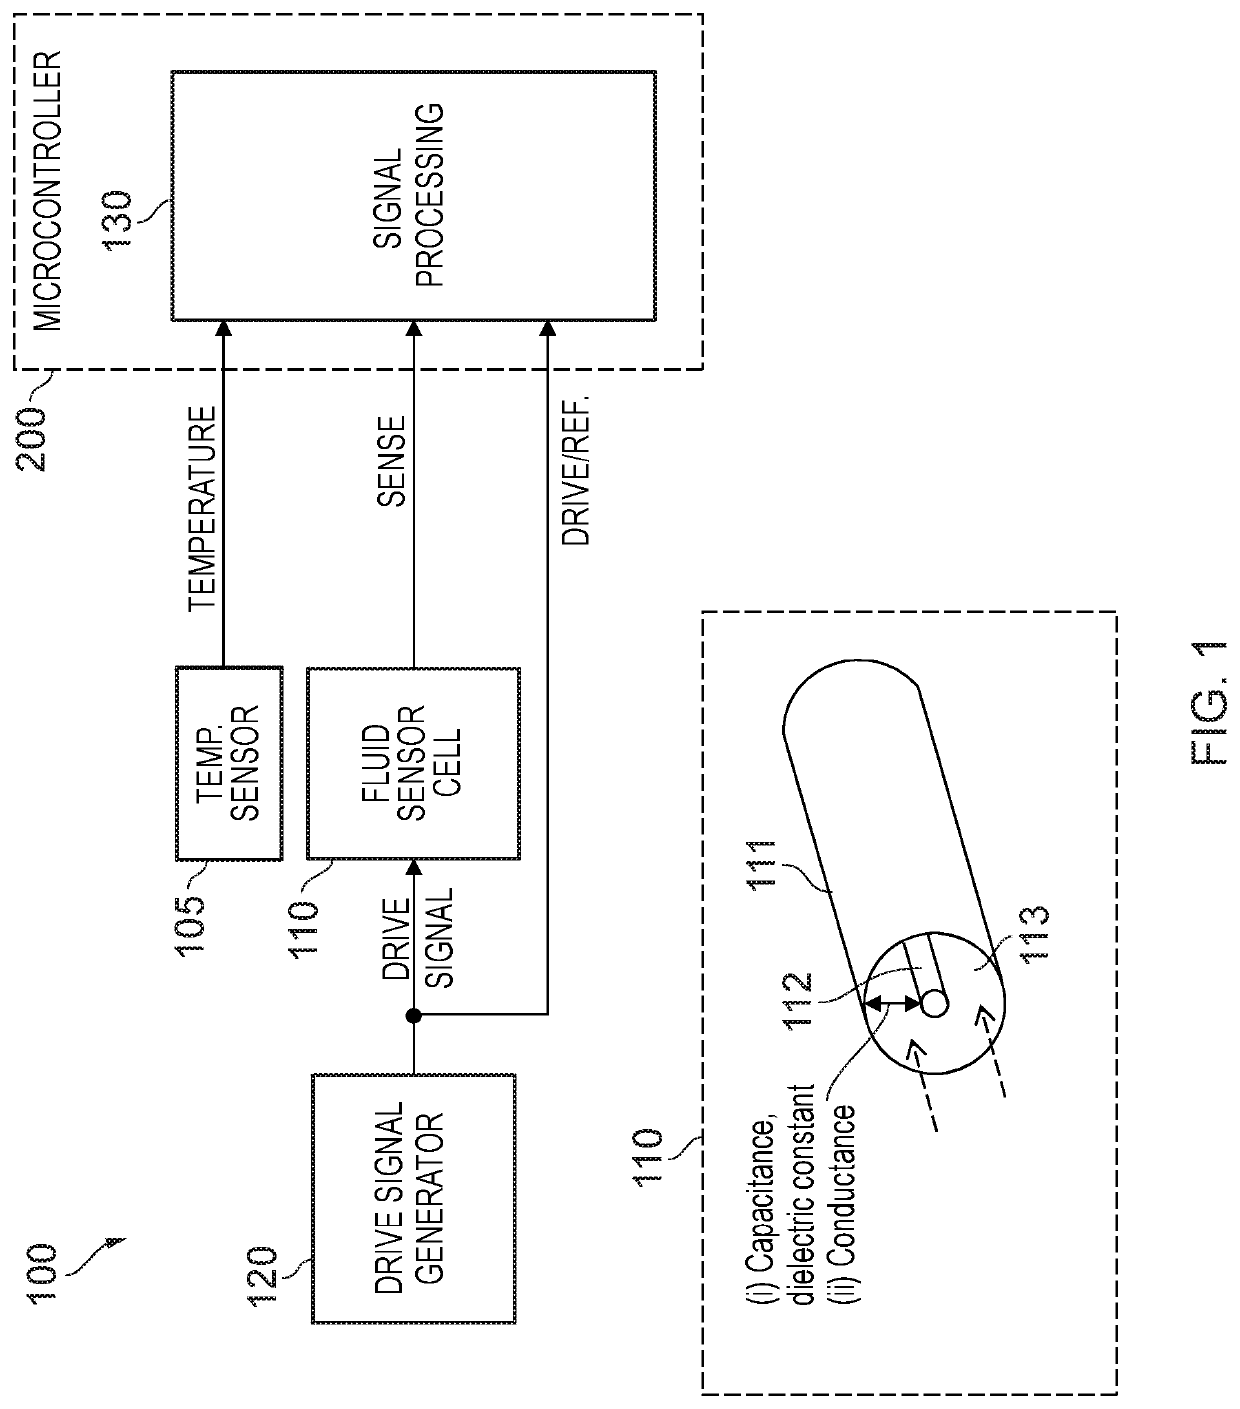 Apparatus for monitoring a fluid